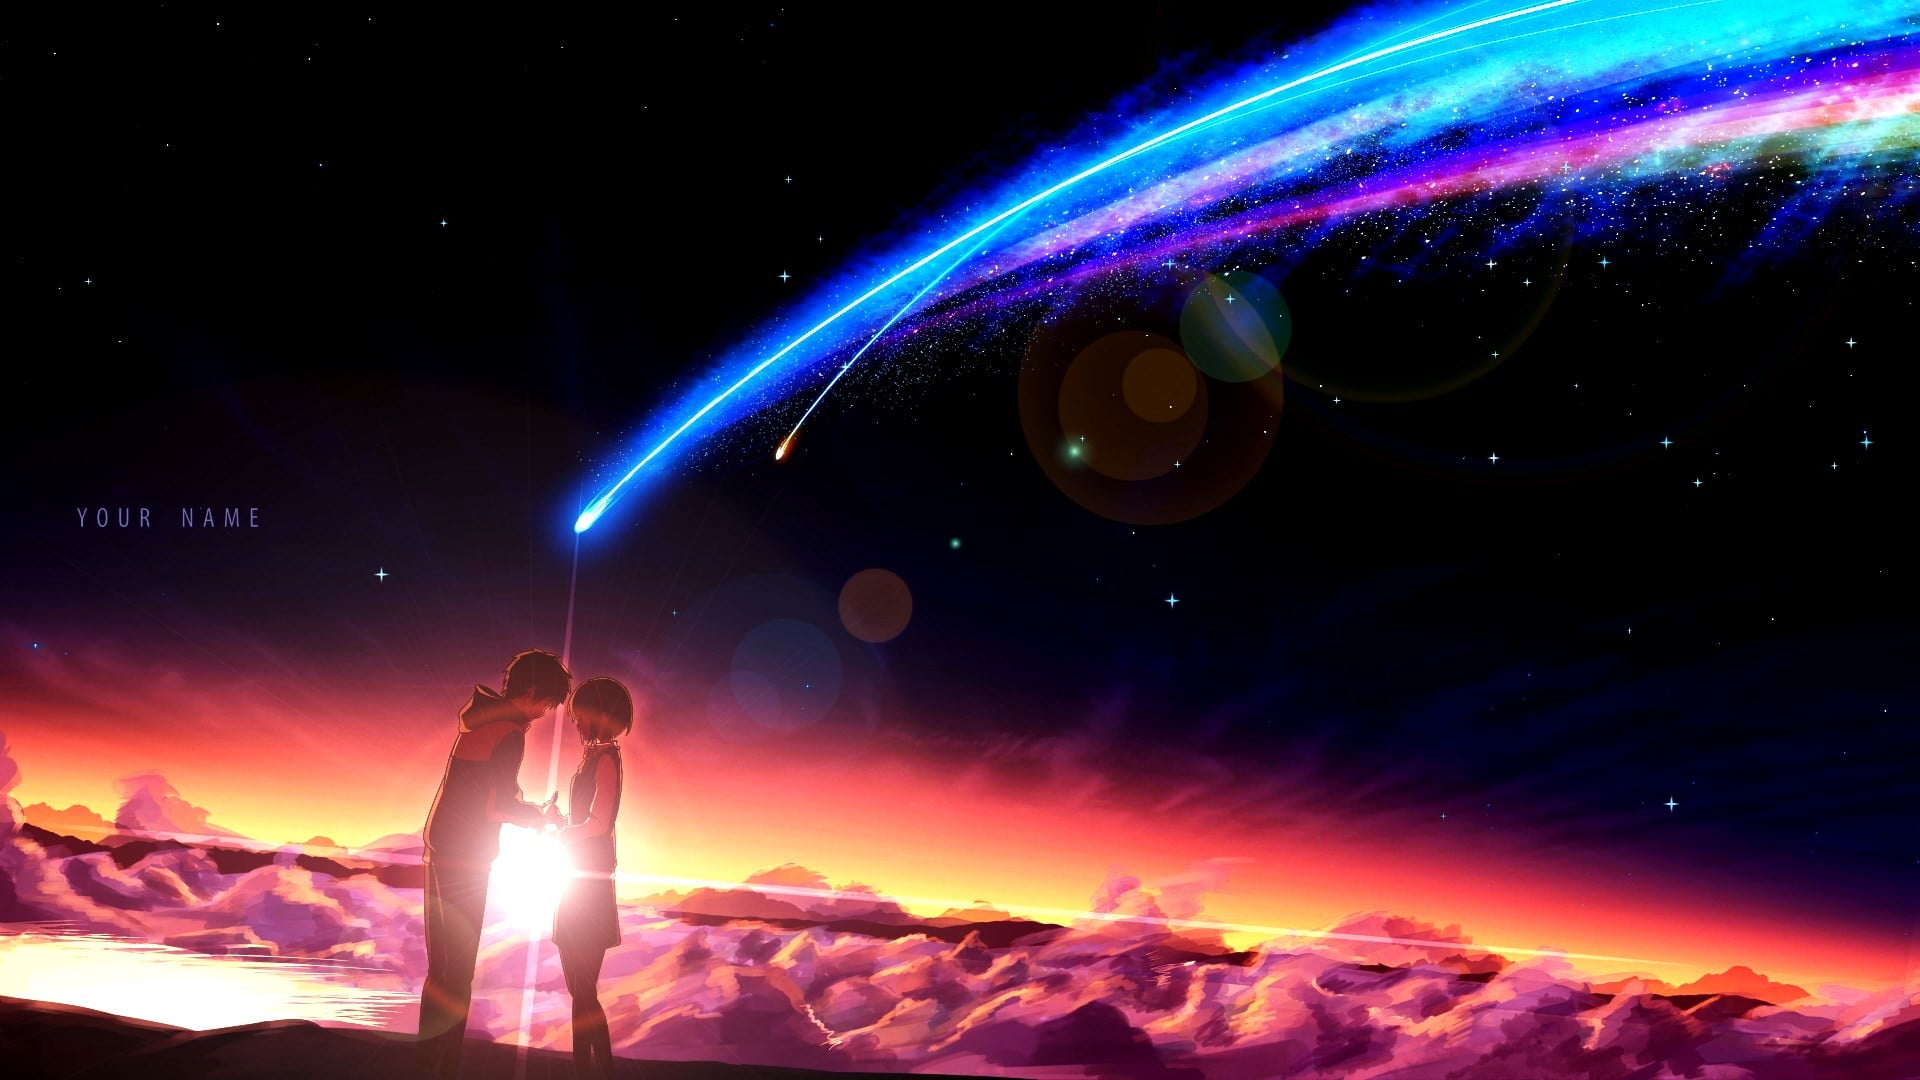 Your Name movie